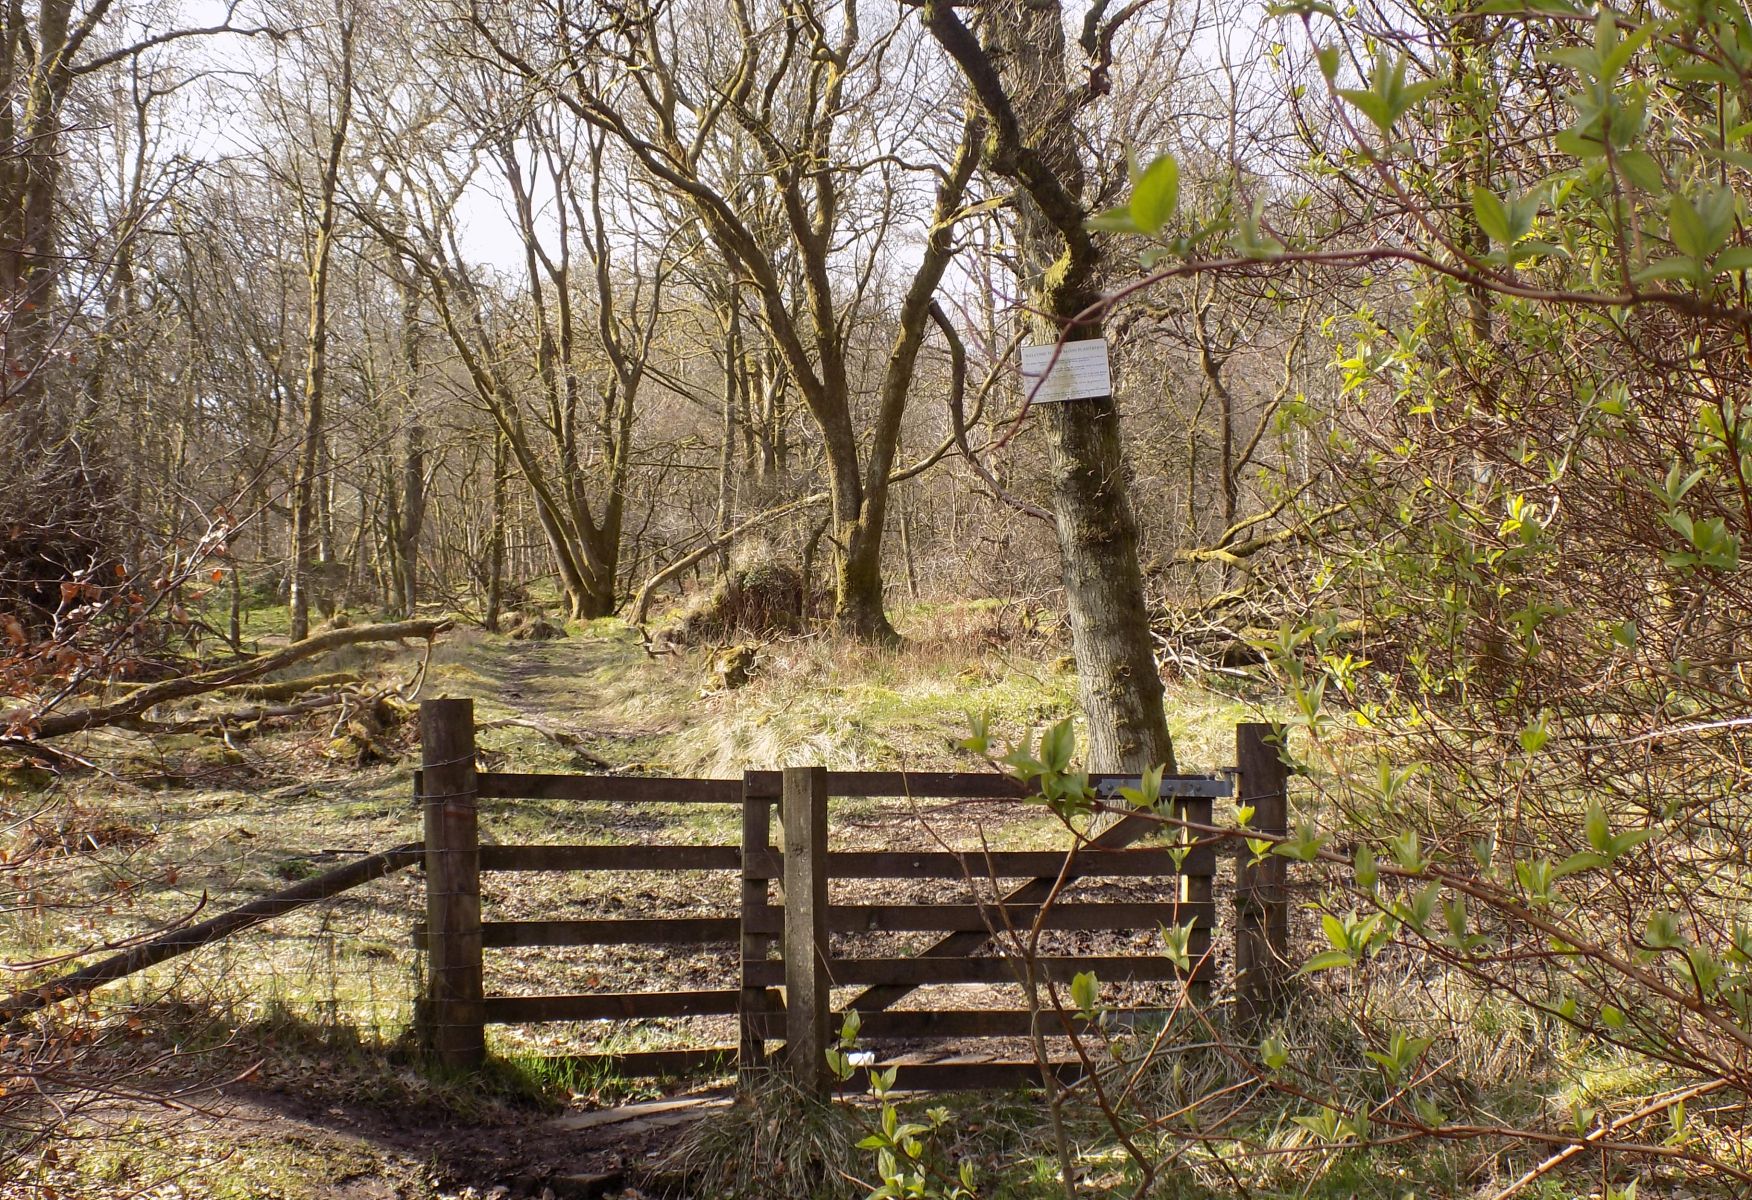 Entrance gate to Mains Wood